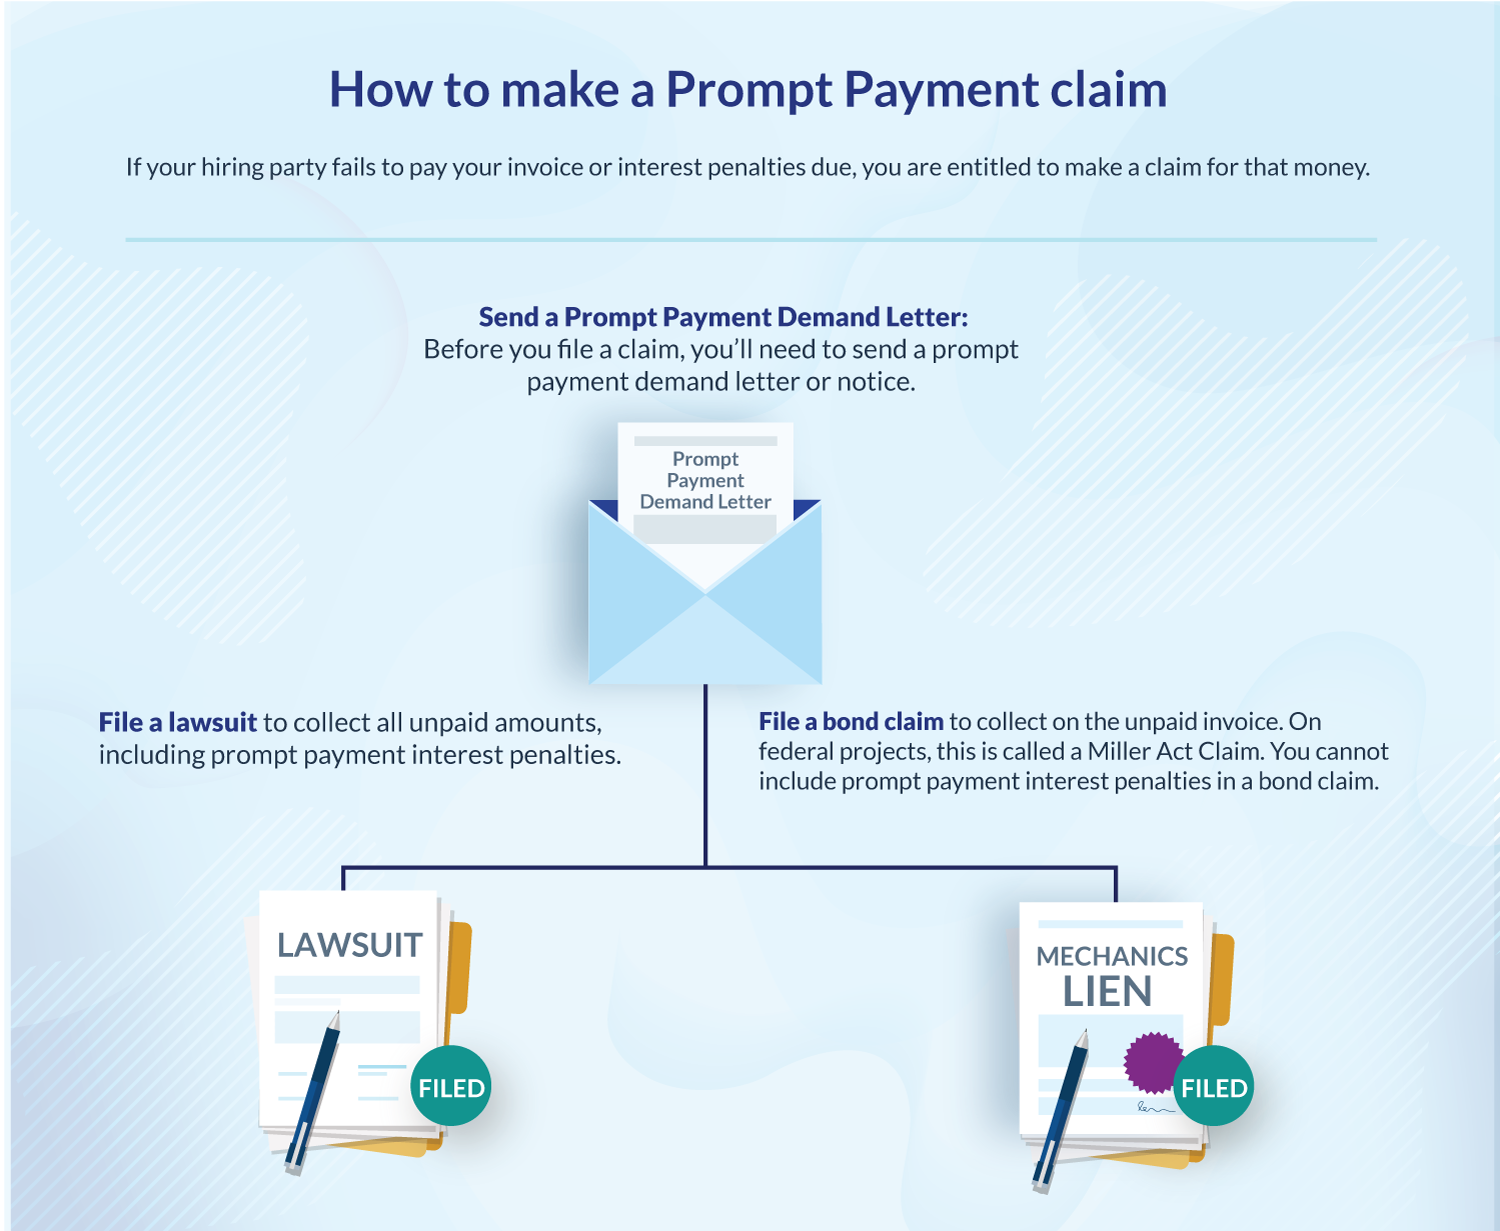 How to make a prompt payment claim